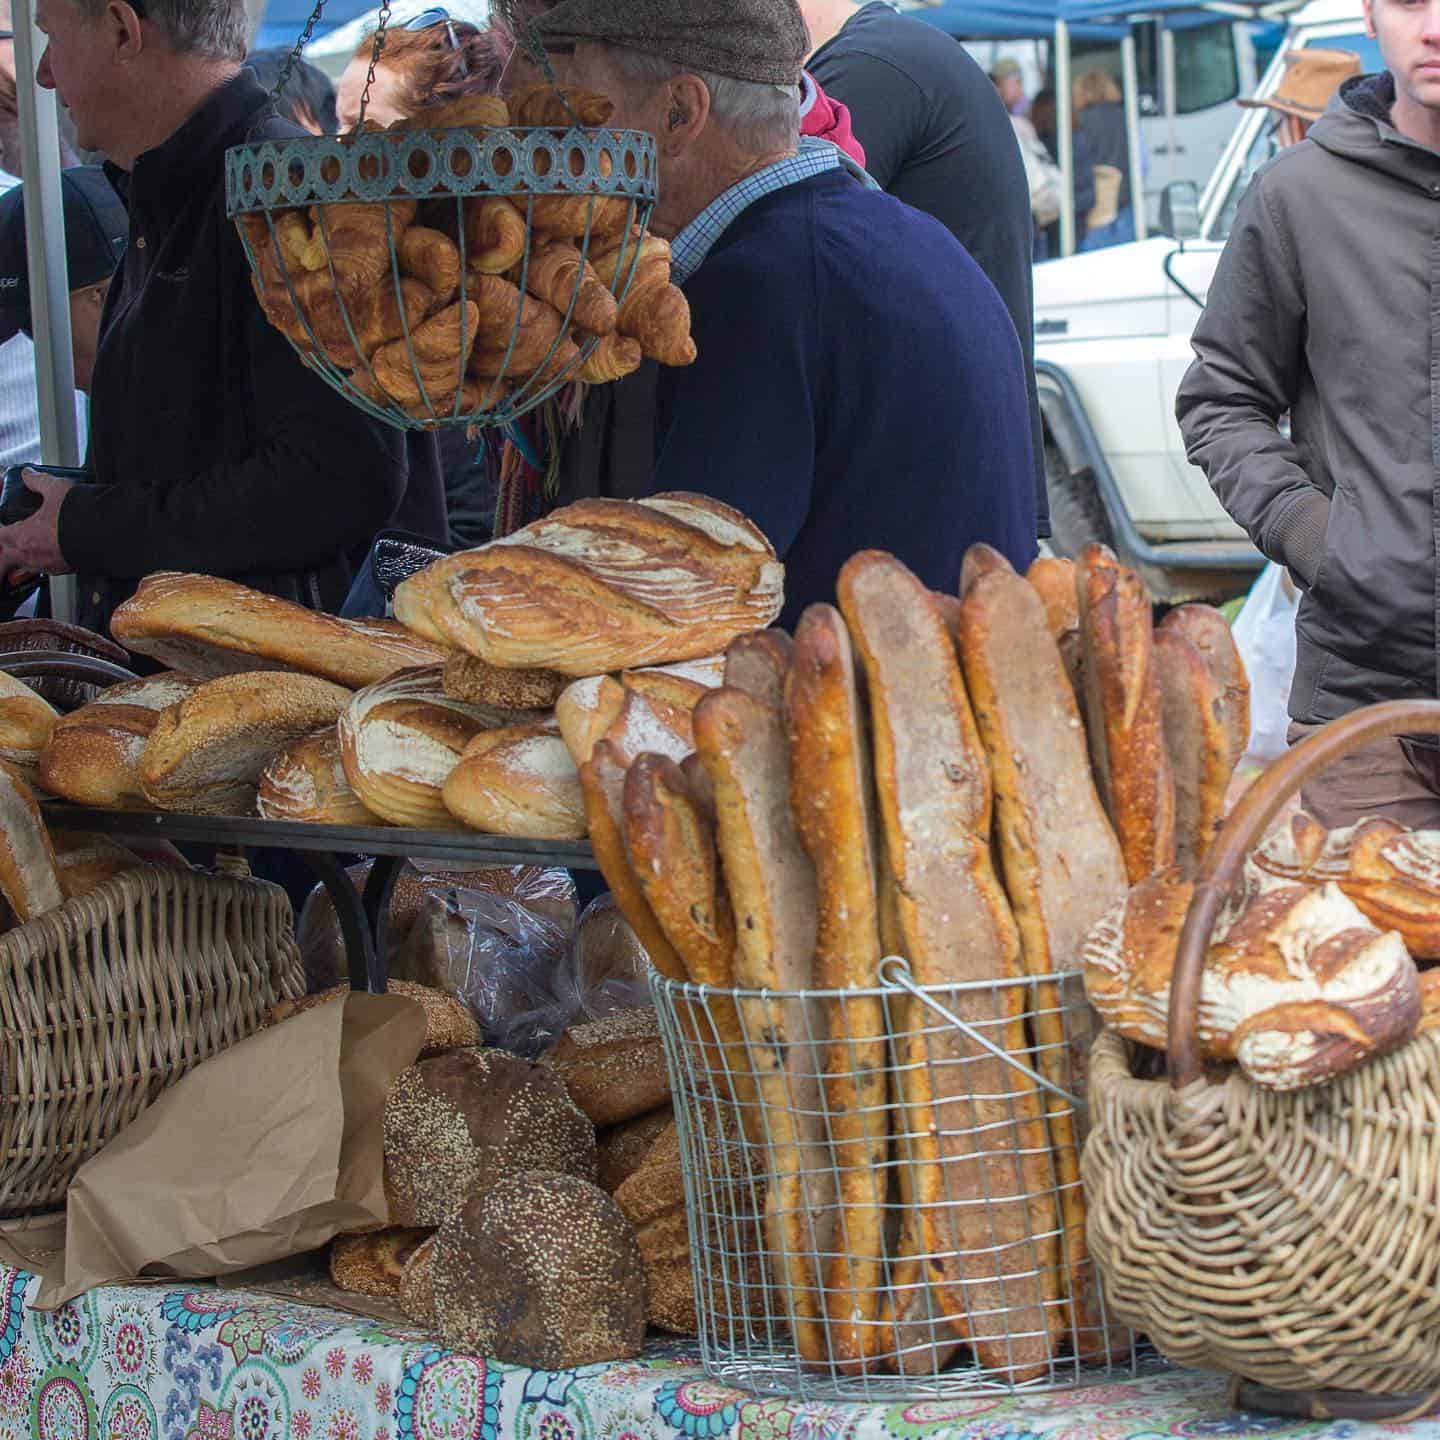 Artisanal bread stall at Margaret River Farmers Market, showcasing a variety of freshly baked goods, symbolizing the region's rich food culture.